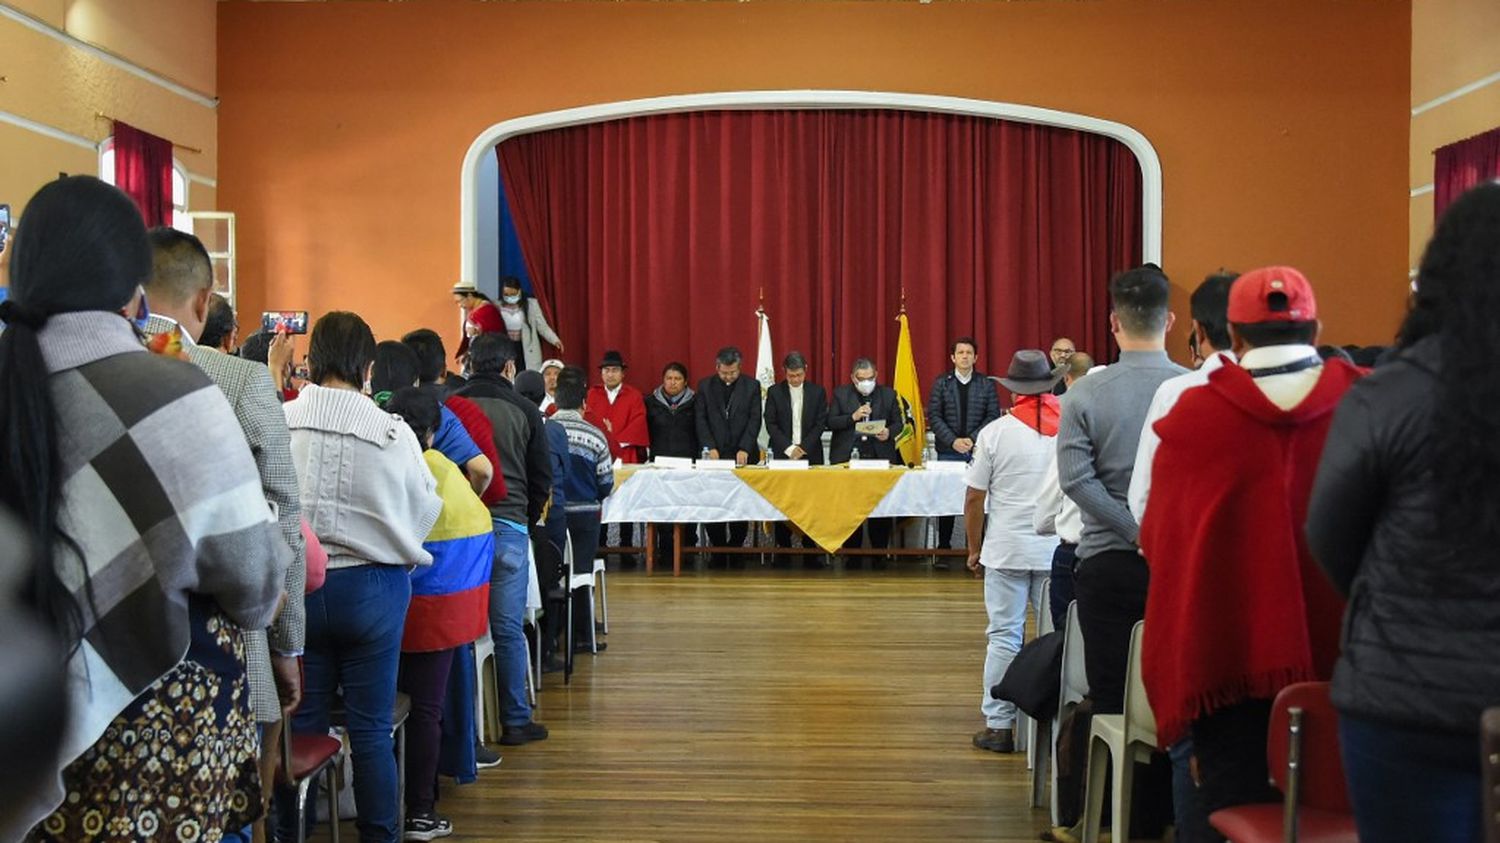 Ecuador: Indigenous peoples and government sign agreement to end protests
